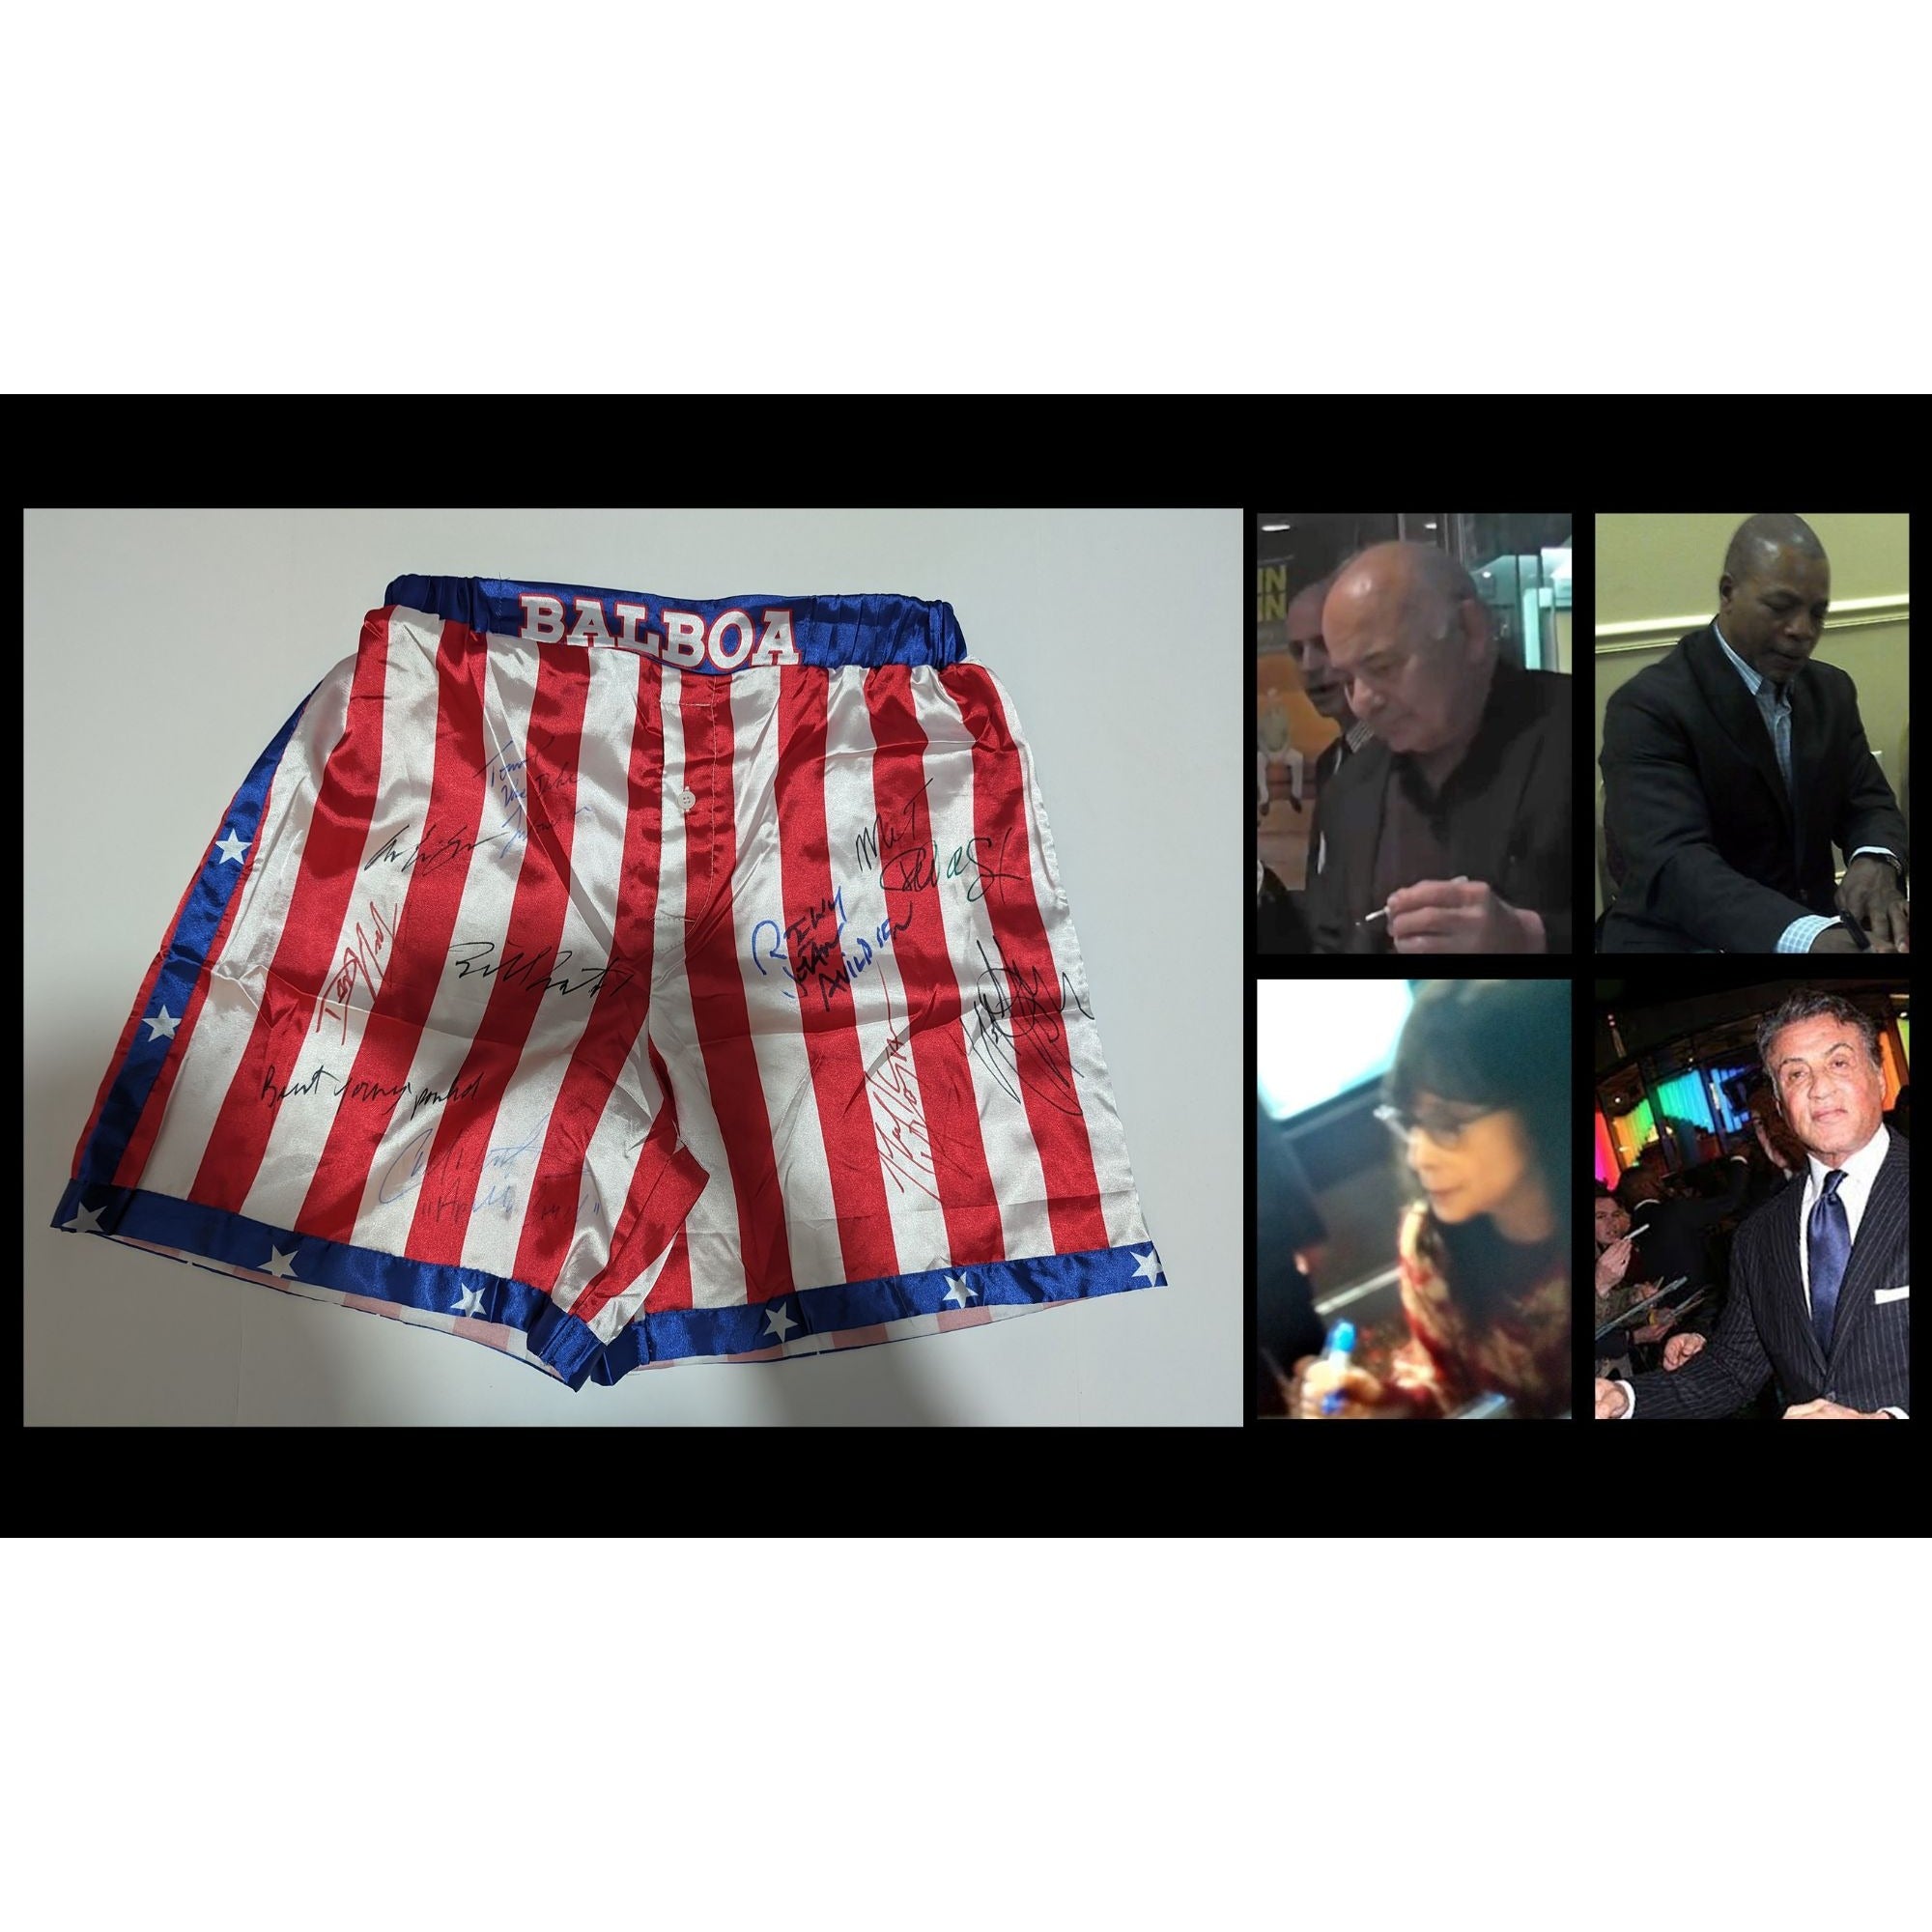 Rocky Balboa USA boxing shorts signed by the cast of Rocky including Sylvester Stallone Carl Weathers talliest shire Mr T Bert Young dolls l